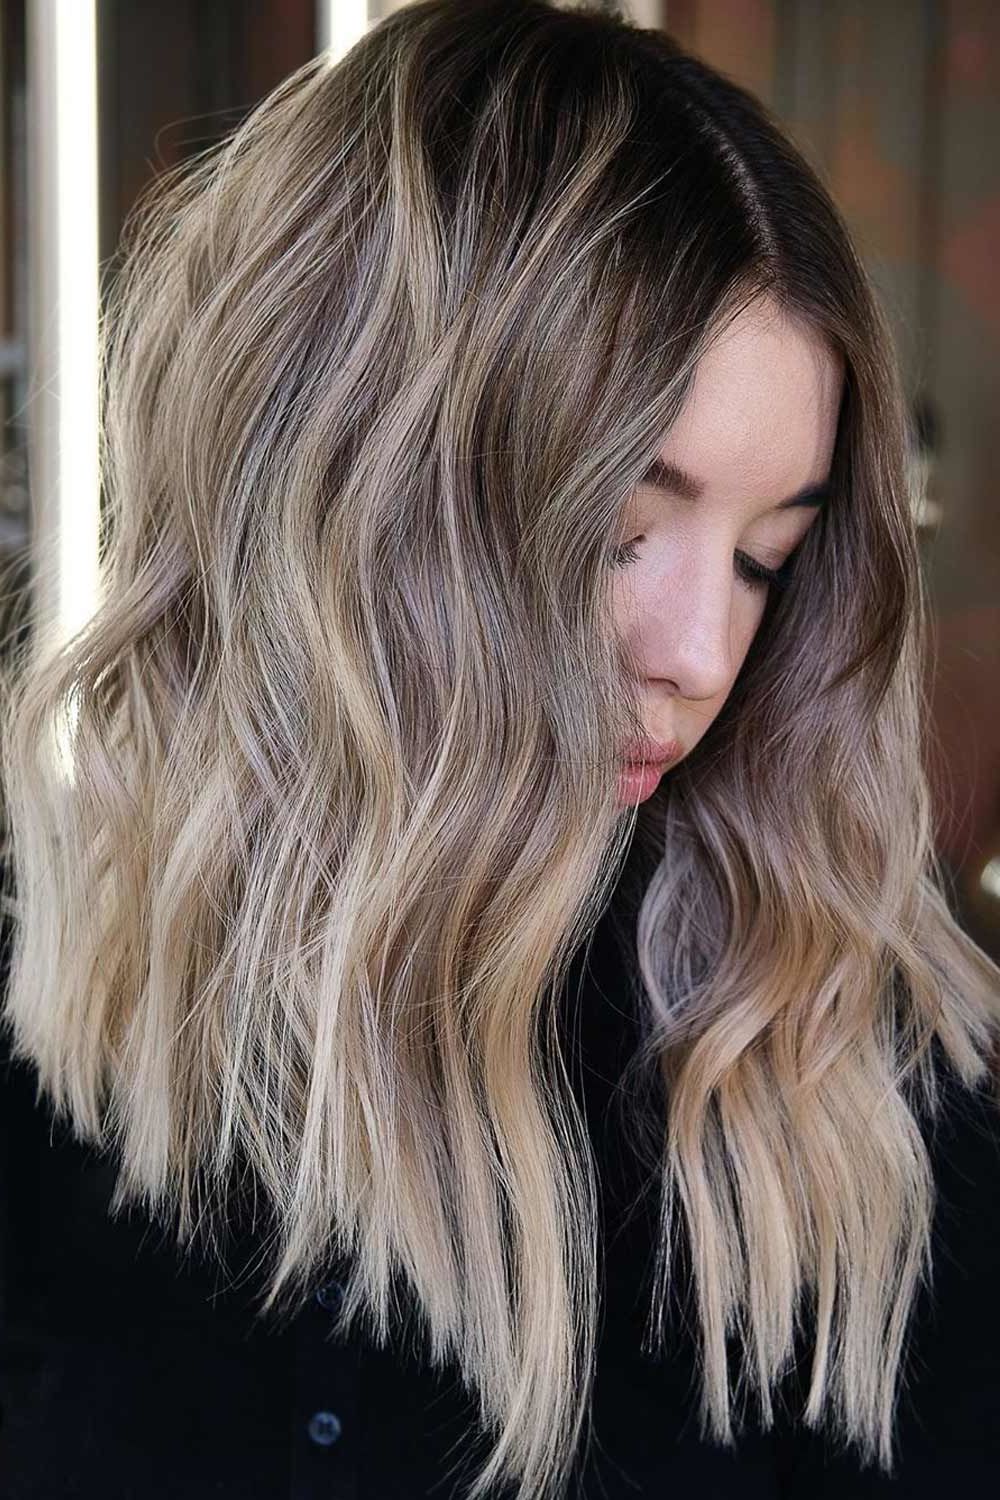 42 Fantastic Dark Blonde Hair Color Ideas – Love Hairstyles Pertaining To Recent Blonde Waves Haircuts With Dark Roots (View 19 of 20)